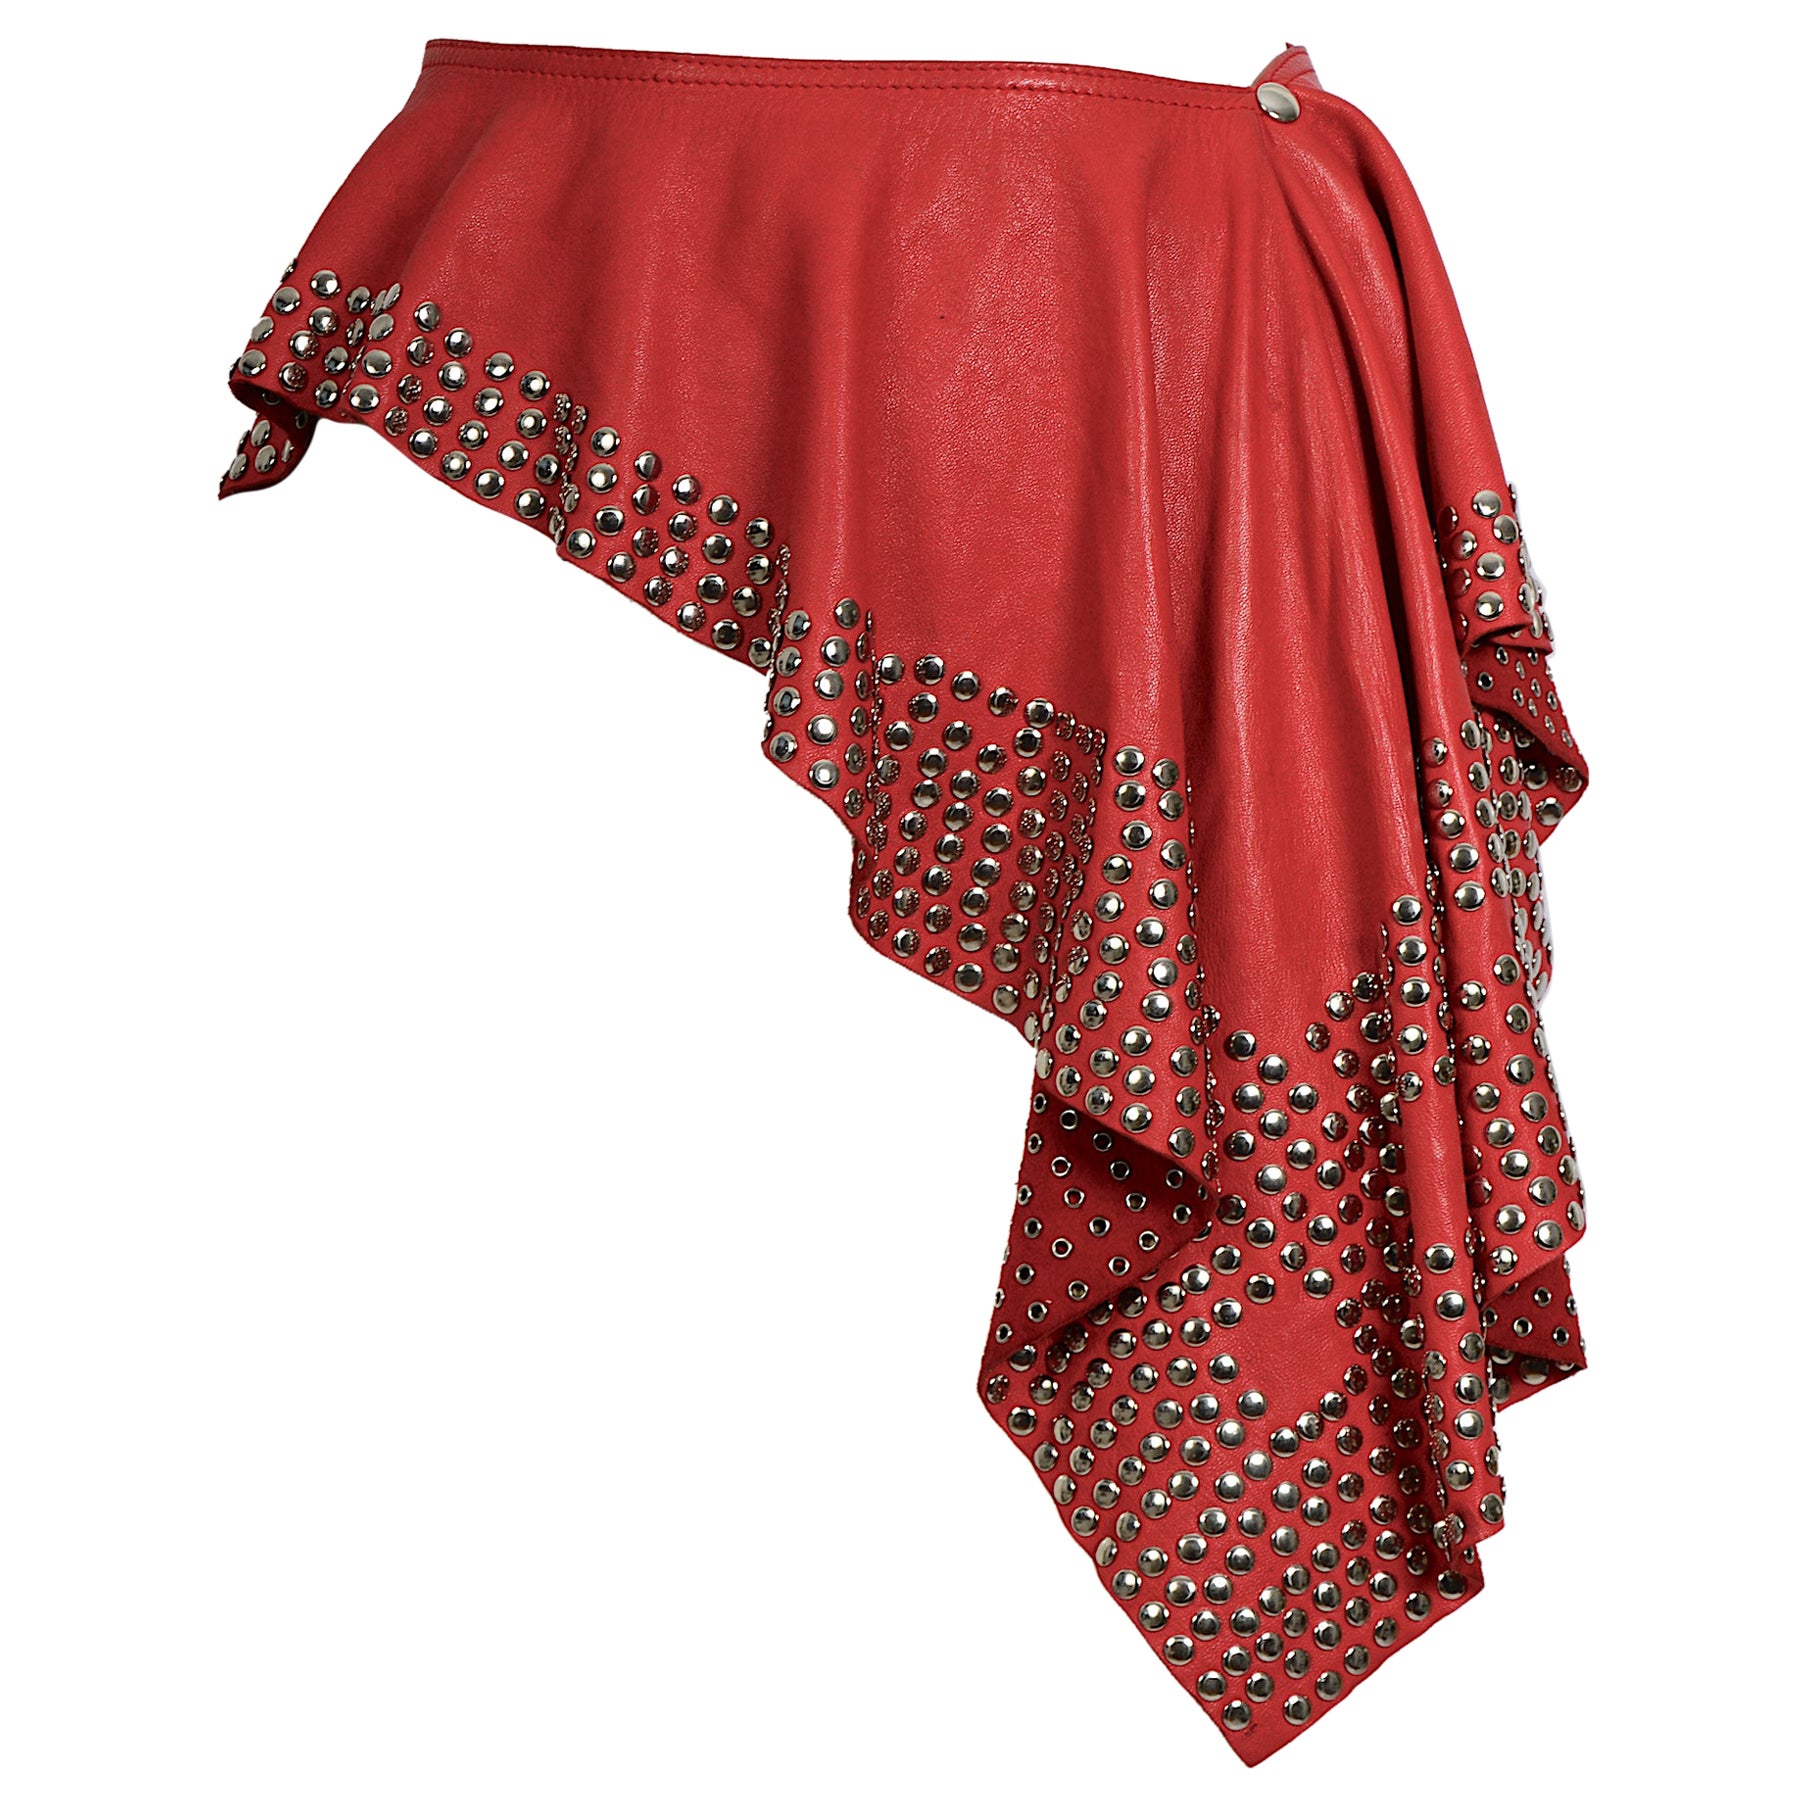 Azzedine Alaia circa 1981 collectionneurs Studded embellished red leather belt skirt en vente